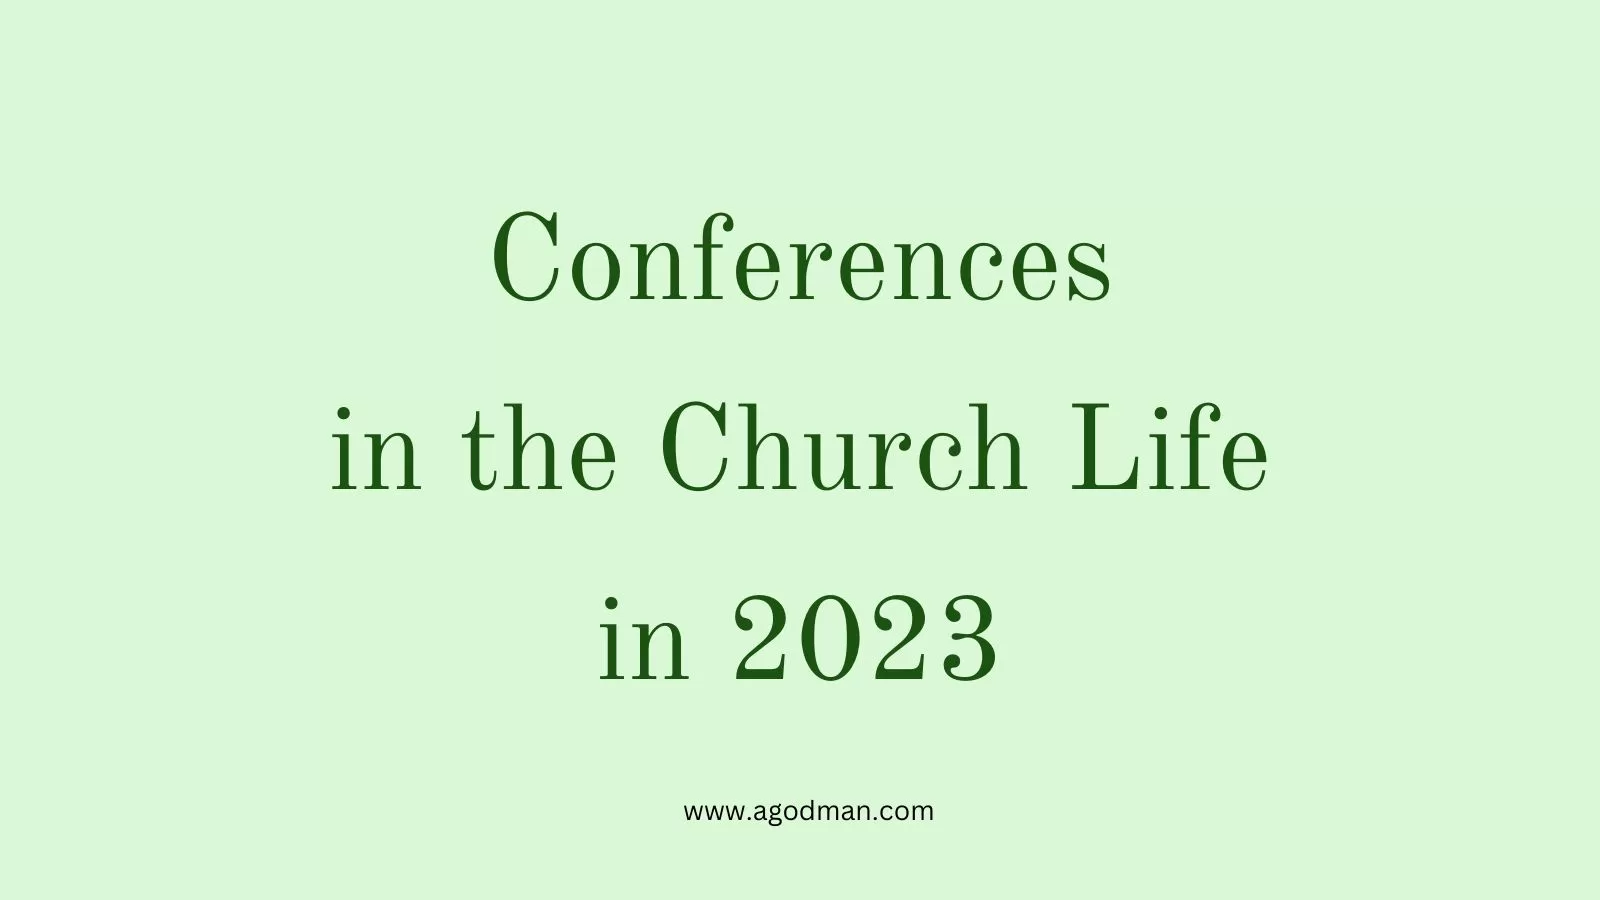 Conferences in the Church Life in 2023 in the Lord's Recovery